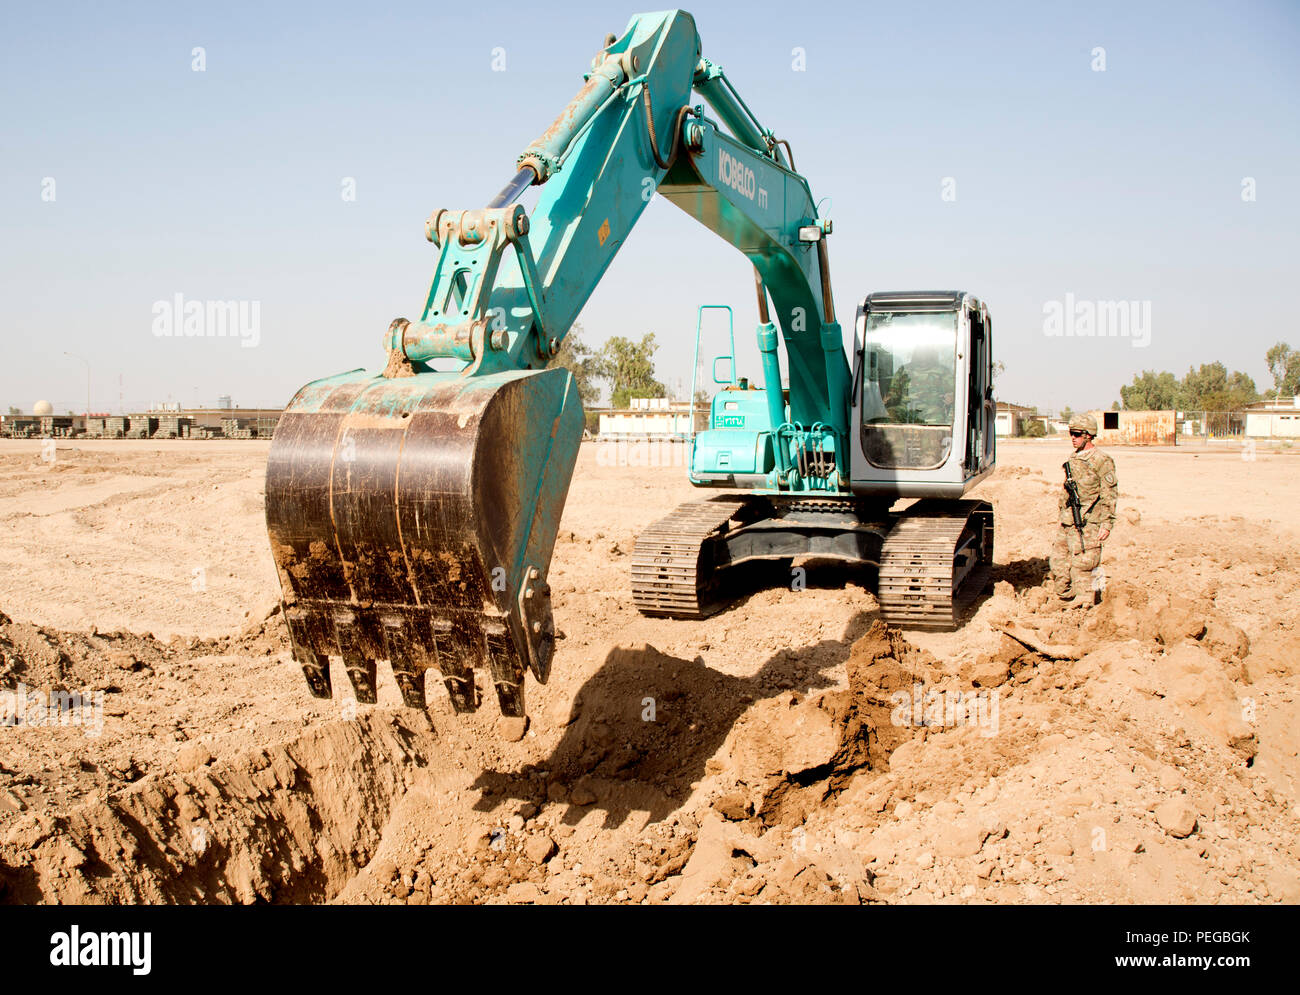 Iraqi army engineers practice digging trenches using a hydraulic excavator at Camp Taji, Iraq, Aug. 11, 2015. Engineer training is critical to the Iraqi army's future success by providing the skills needed to enhance their warfighting capabilities. Combined Joint Task Force - Operation Inherent Resolve's multinational effort is committed to building that capacity within the Iraqi security forces to degrade and ultimately defeat the Islamic State of Iraq and the Levant. (U.S. Army photo by Spc. Paris Maxey/Released) Stock Photo